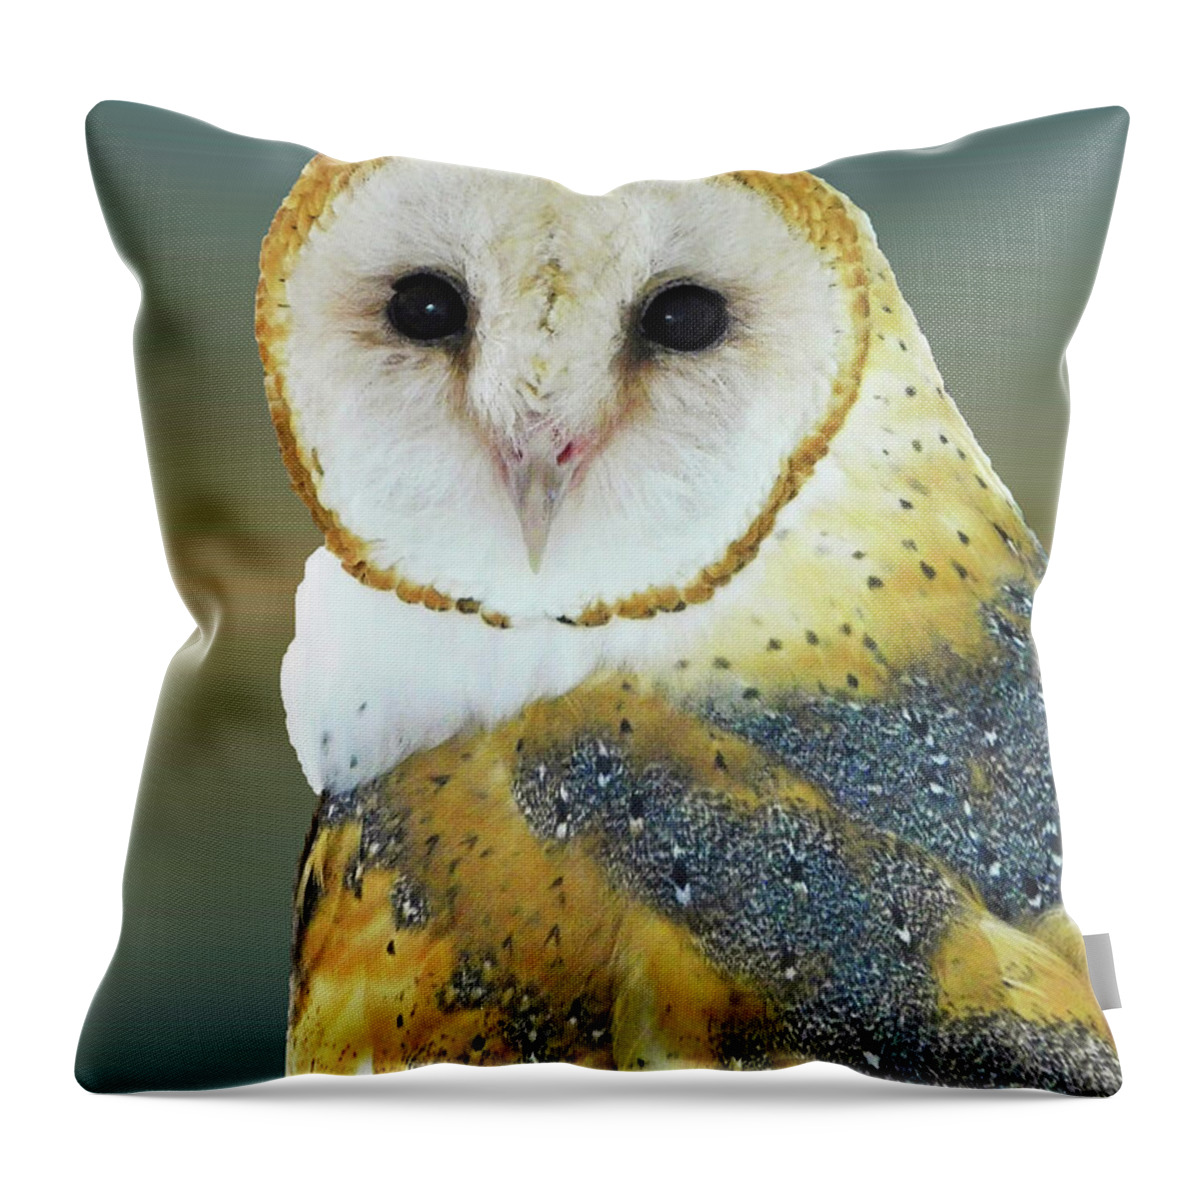 Barn Owls Throw Pillow featuring the photograph Barn Owl Portrait by Emmy Marie Vickers